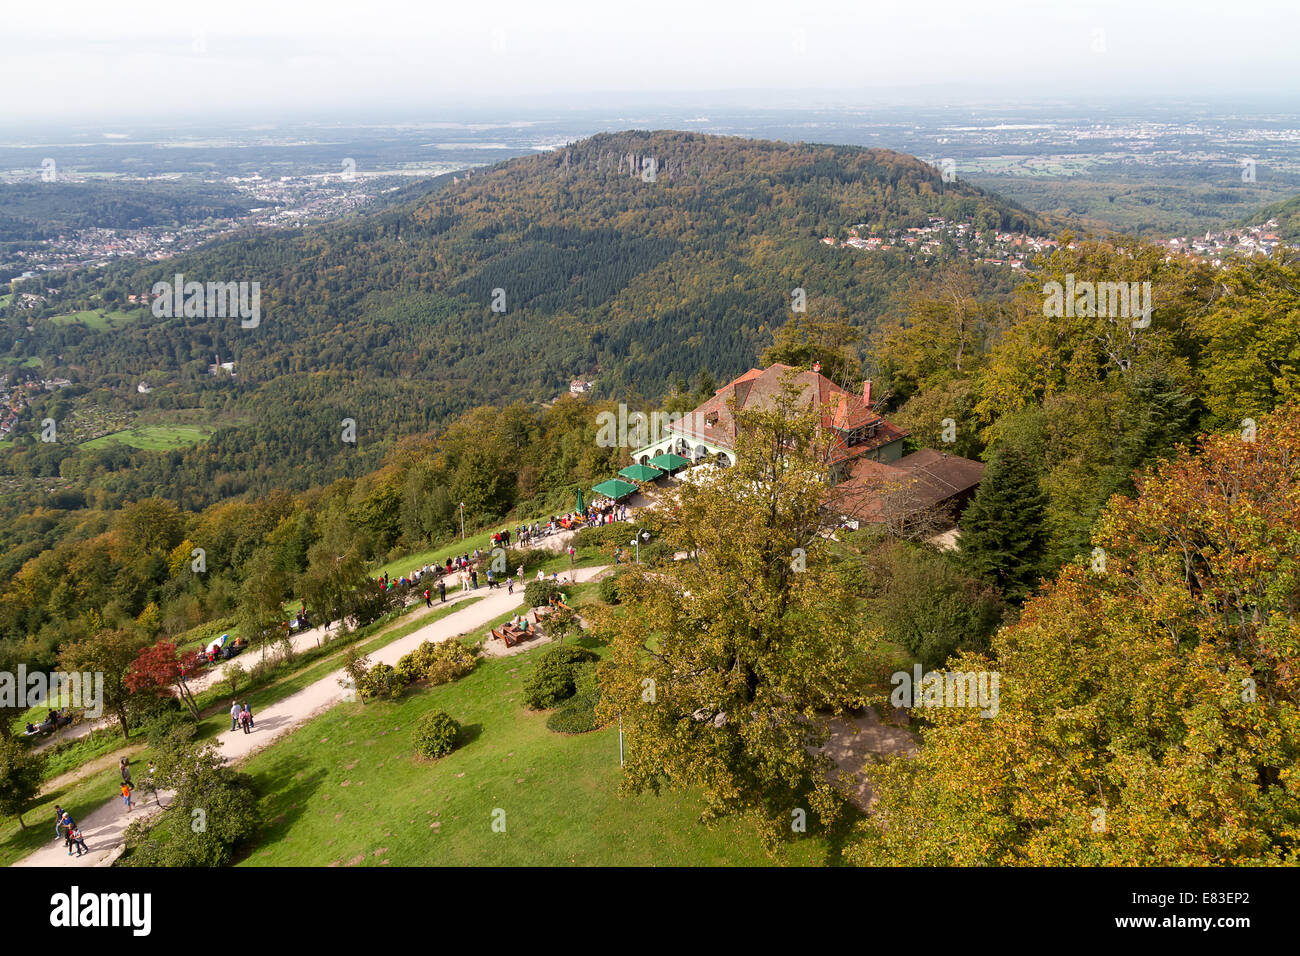 Summit Merkur Baden Baden Germany High Resolution Stock Photography and  Images - Alamy